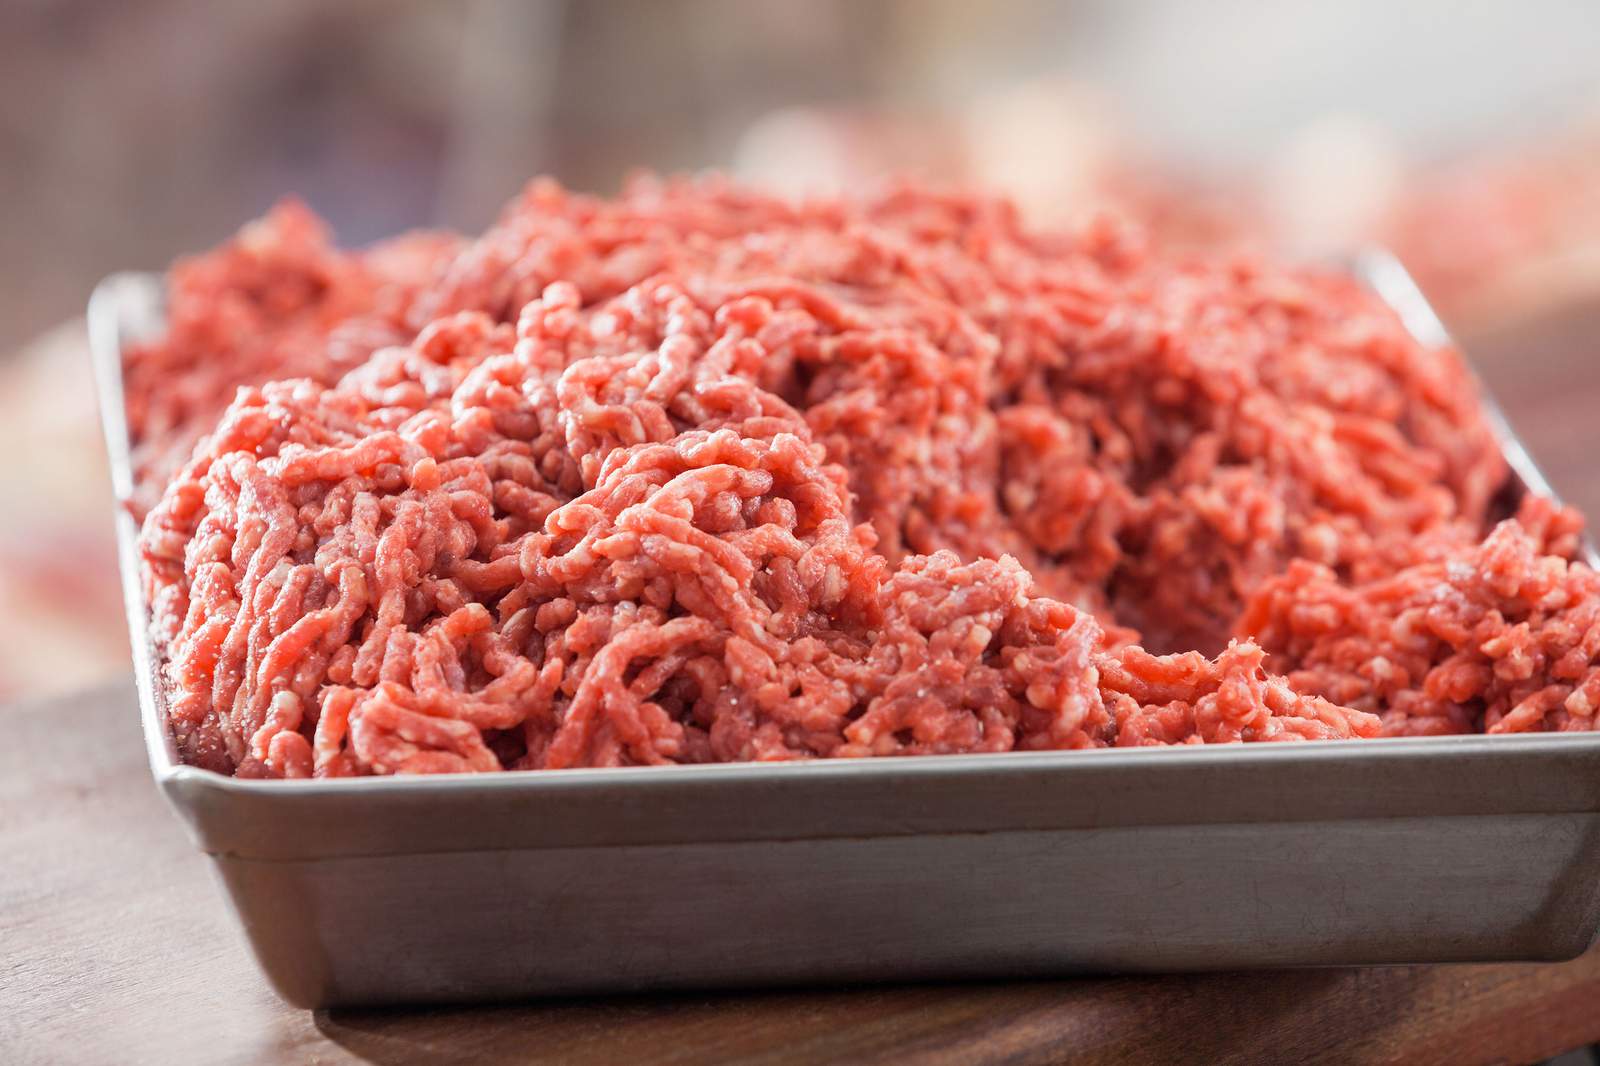 Over 40,000 pounds of ground beef recalled due to E. coli concerns